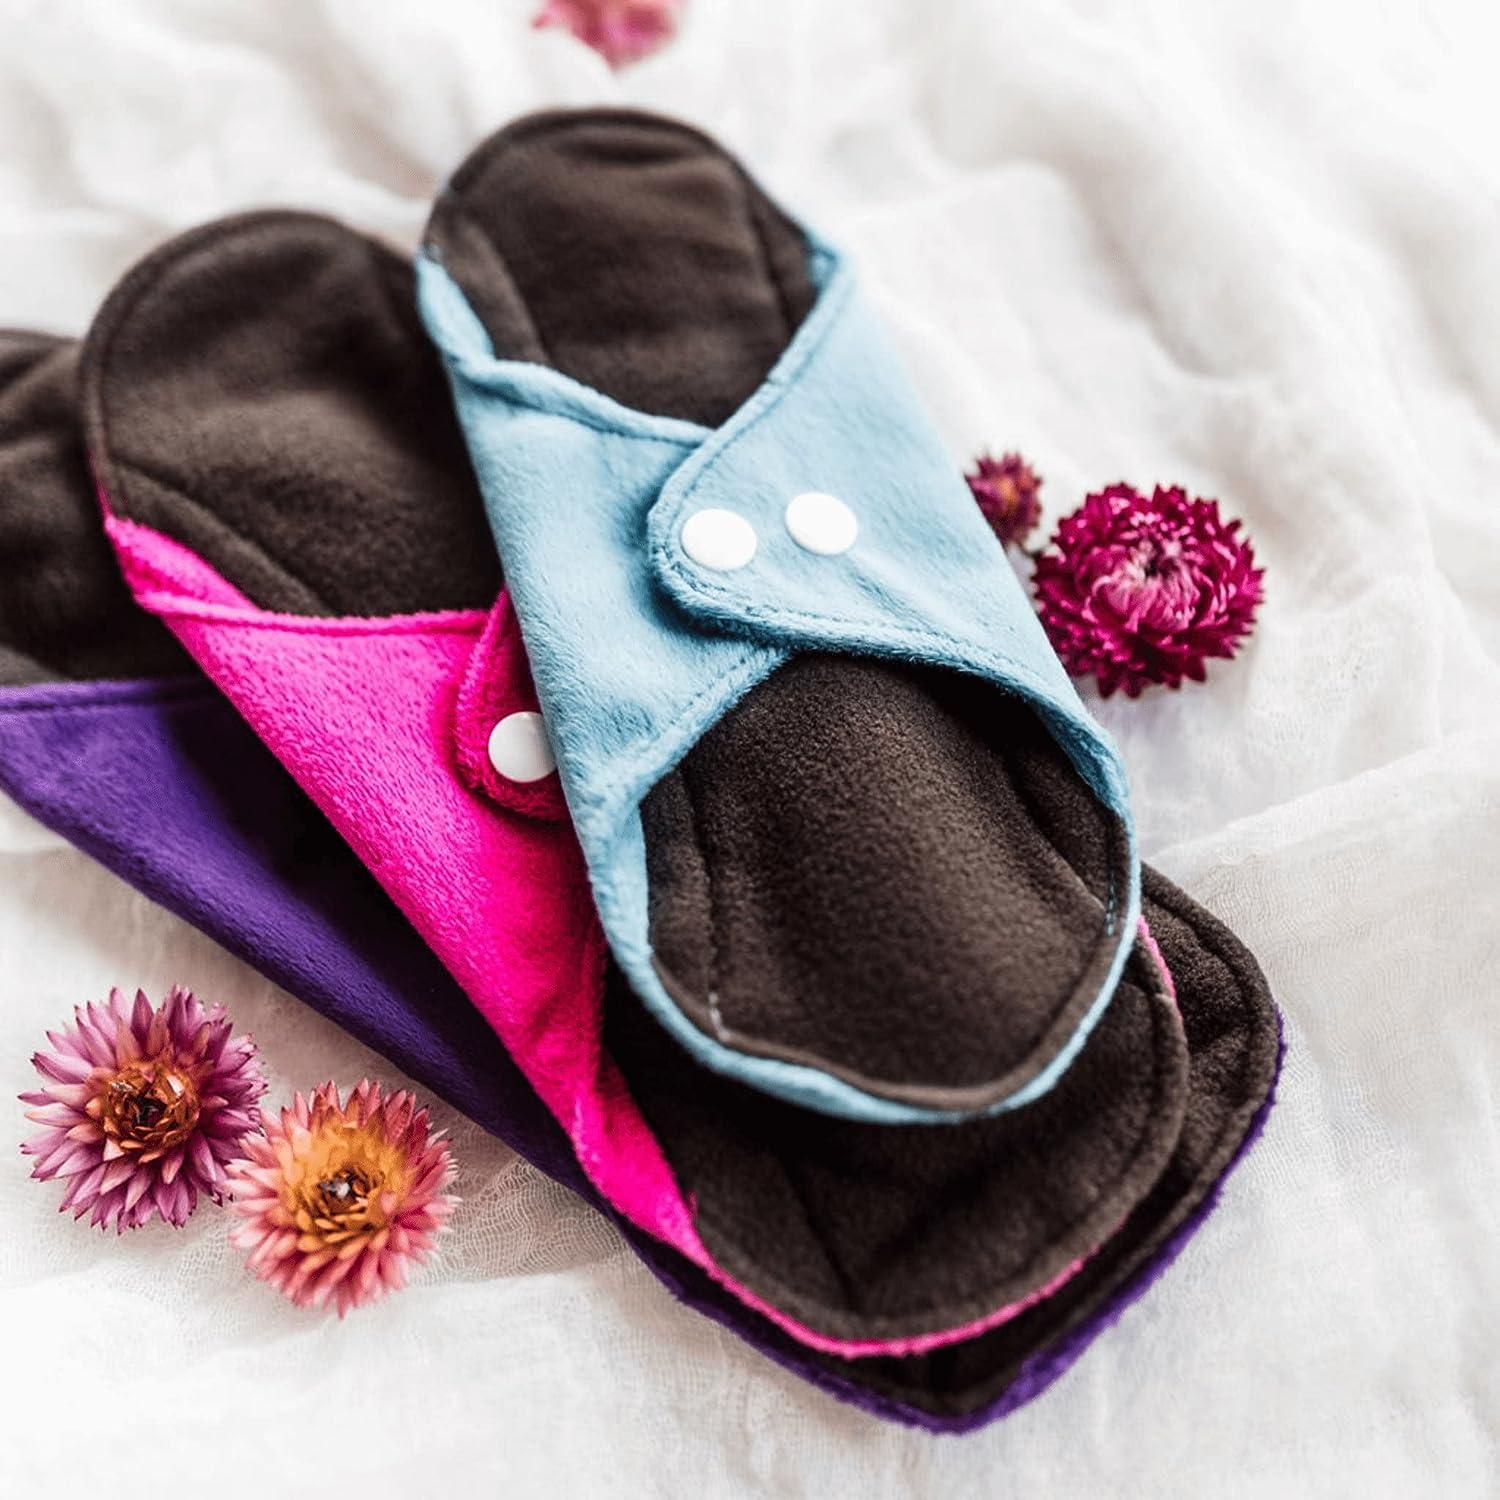 Femallay Reusable Cloth Menstrual Pads - Feminine Pads w/Charcoal Bamboo  Layer Washable Sanitary Pads for Women Soft Absorbent Pads Feminine Hygiene  Products Single Pad Colorful Minky/Small